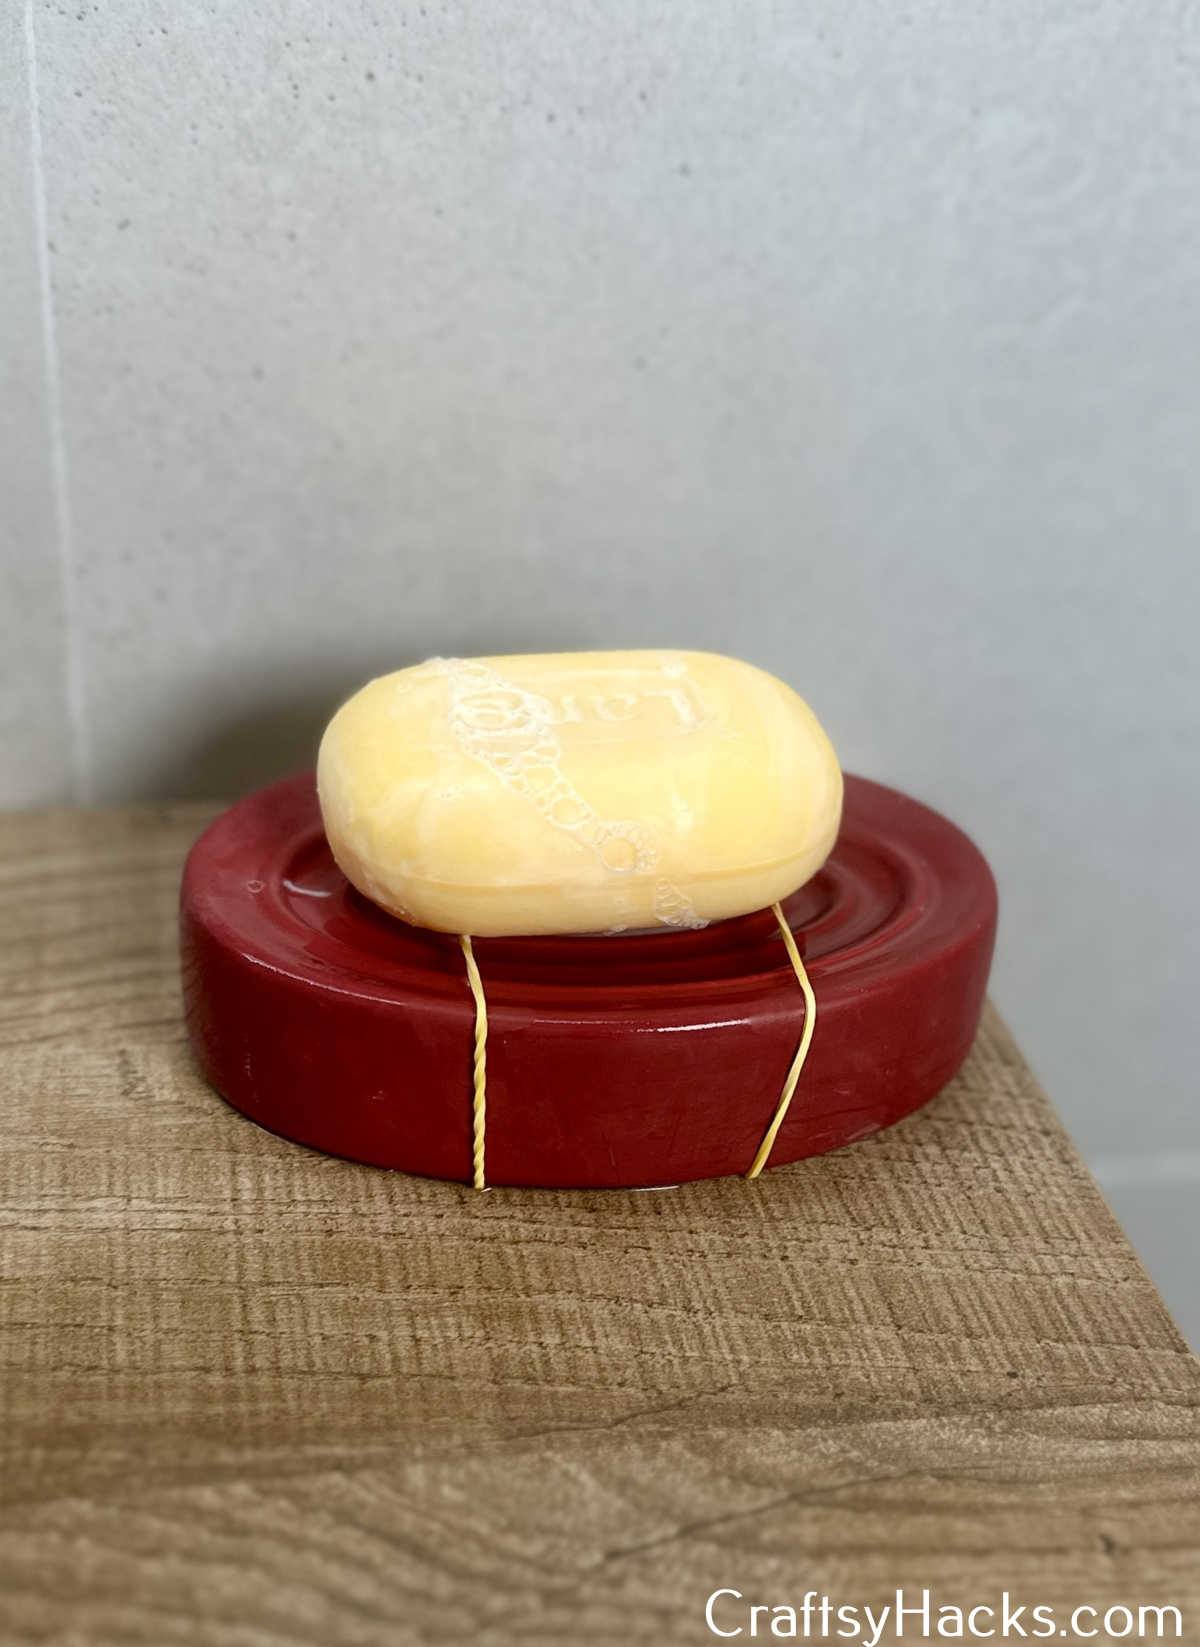 keep bar of soap clean with rubberbands